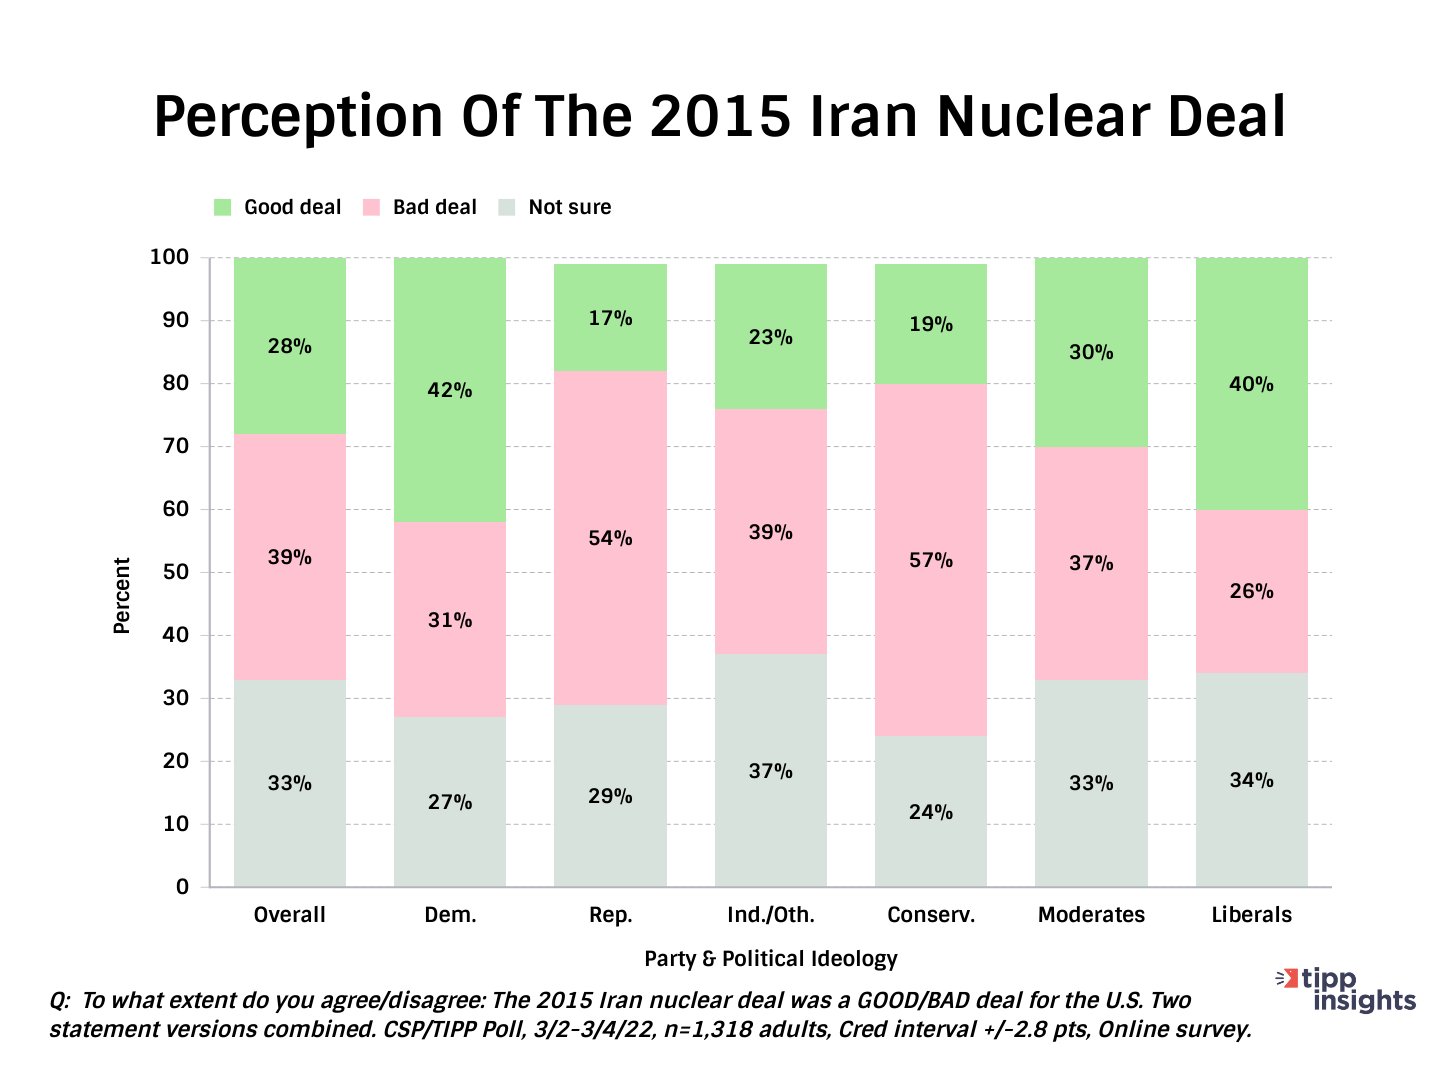 Perception of the 2015 Iran nuclear deal